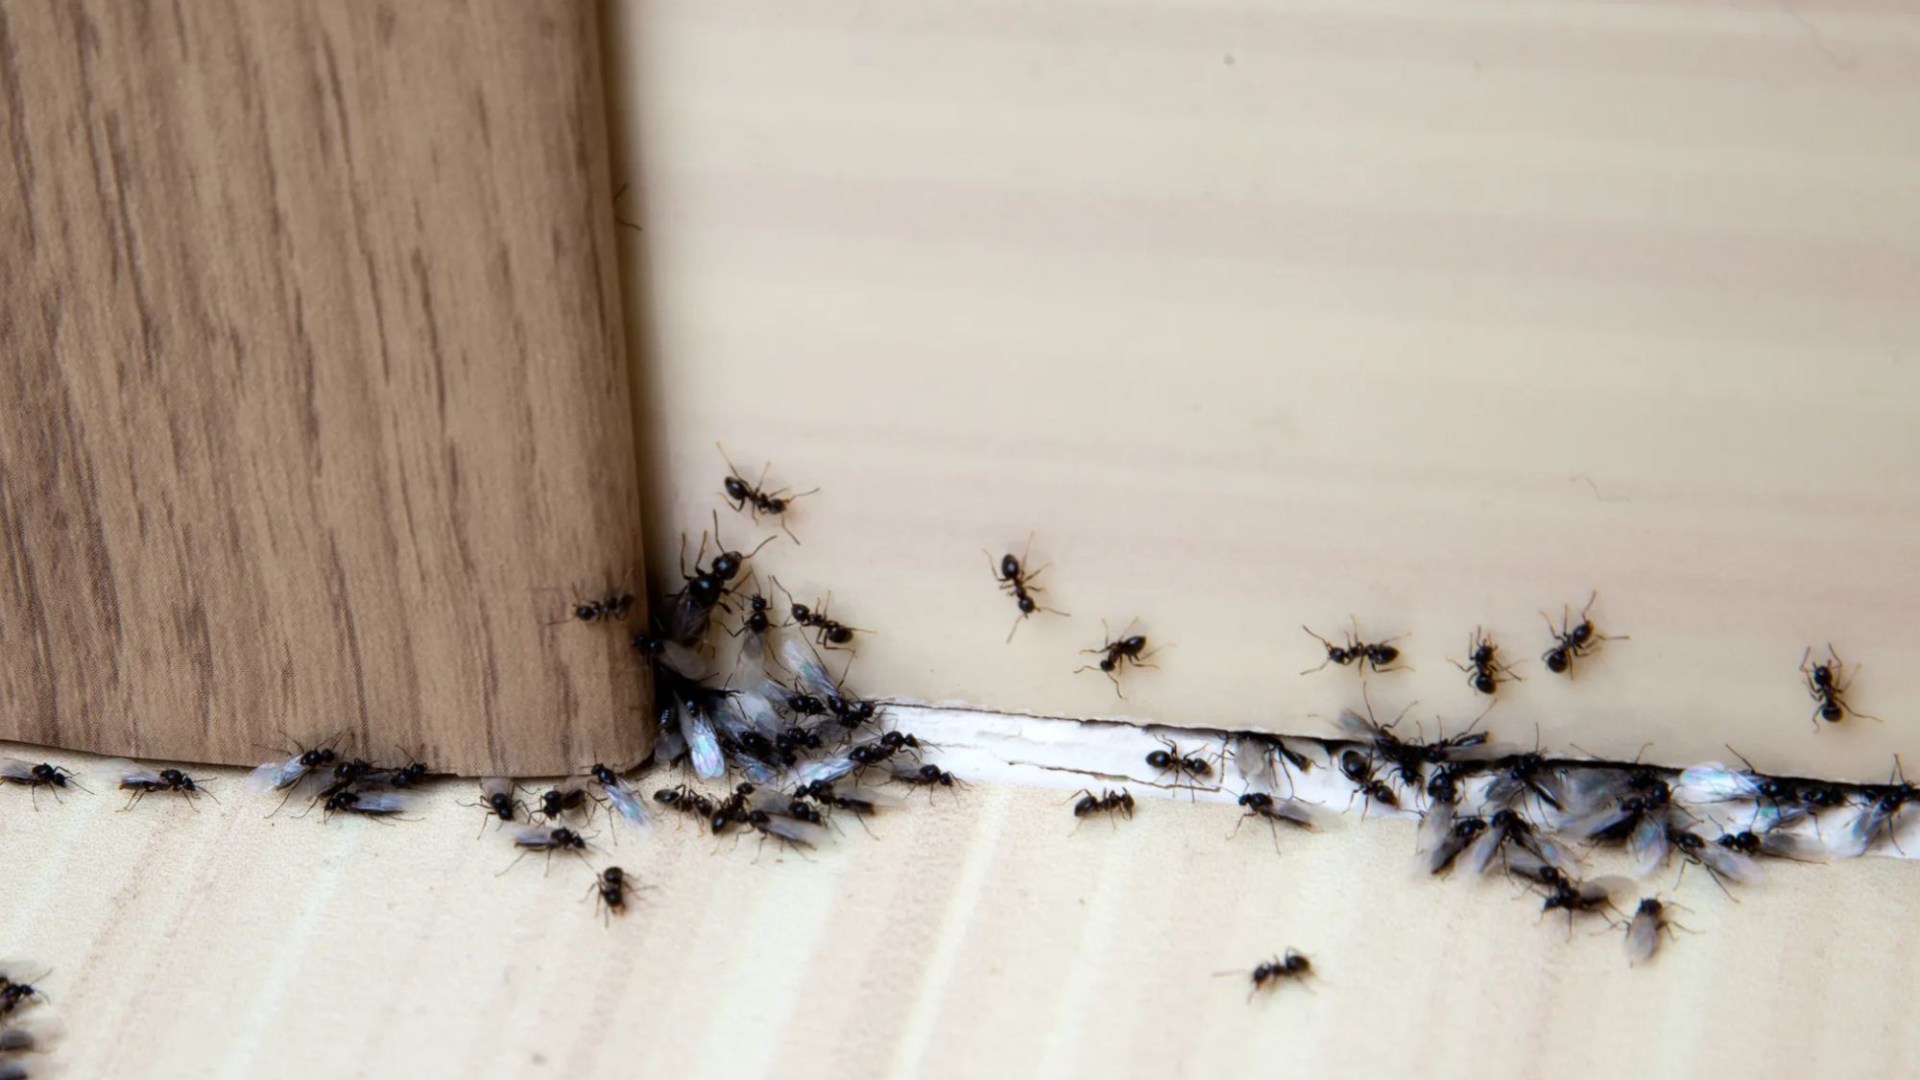 Its the only thing that ensures they never come back cleaner swears by 10 hack to get rid of ants for good [Video]